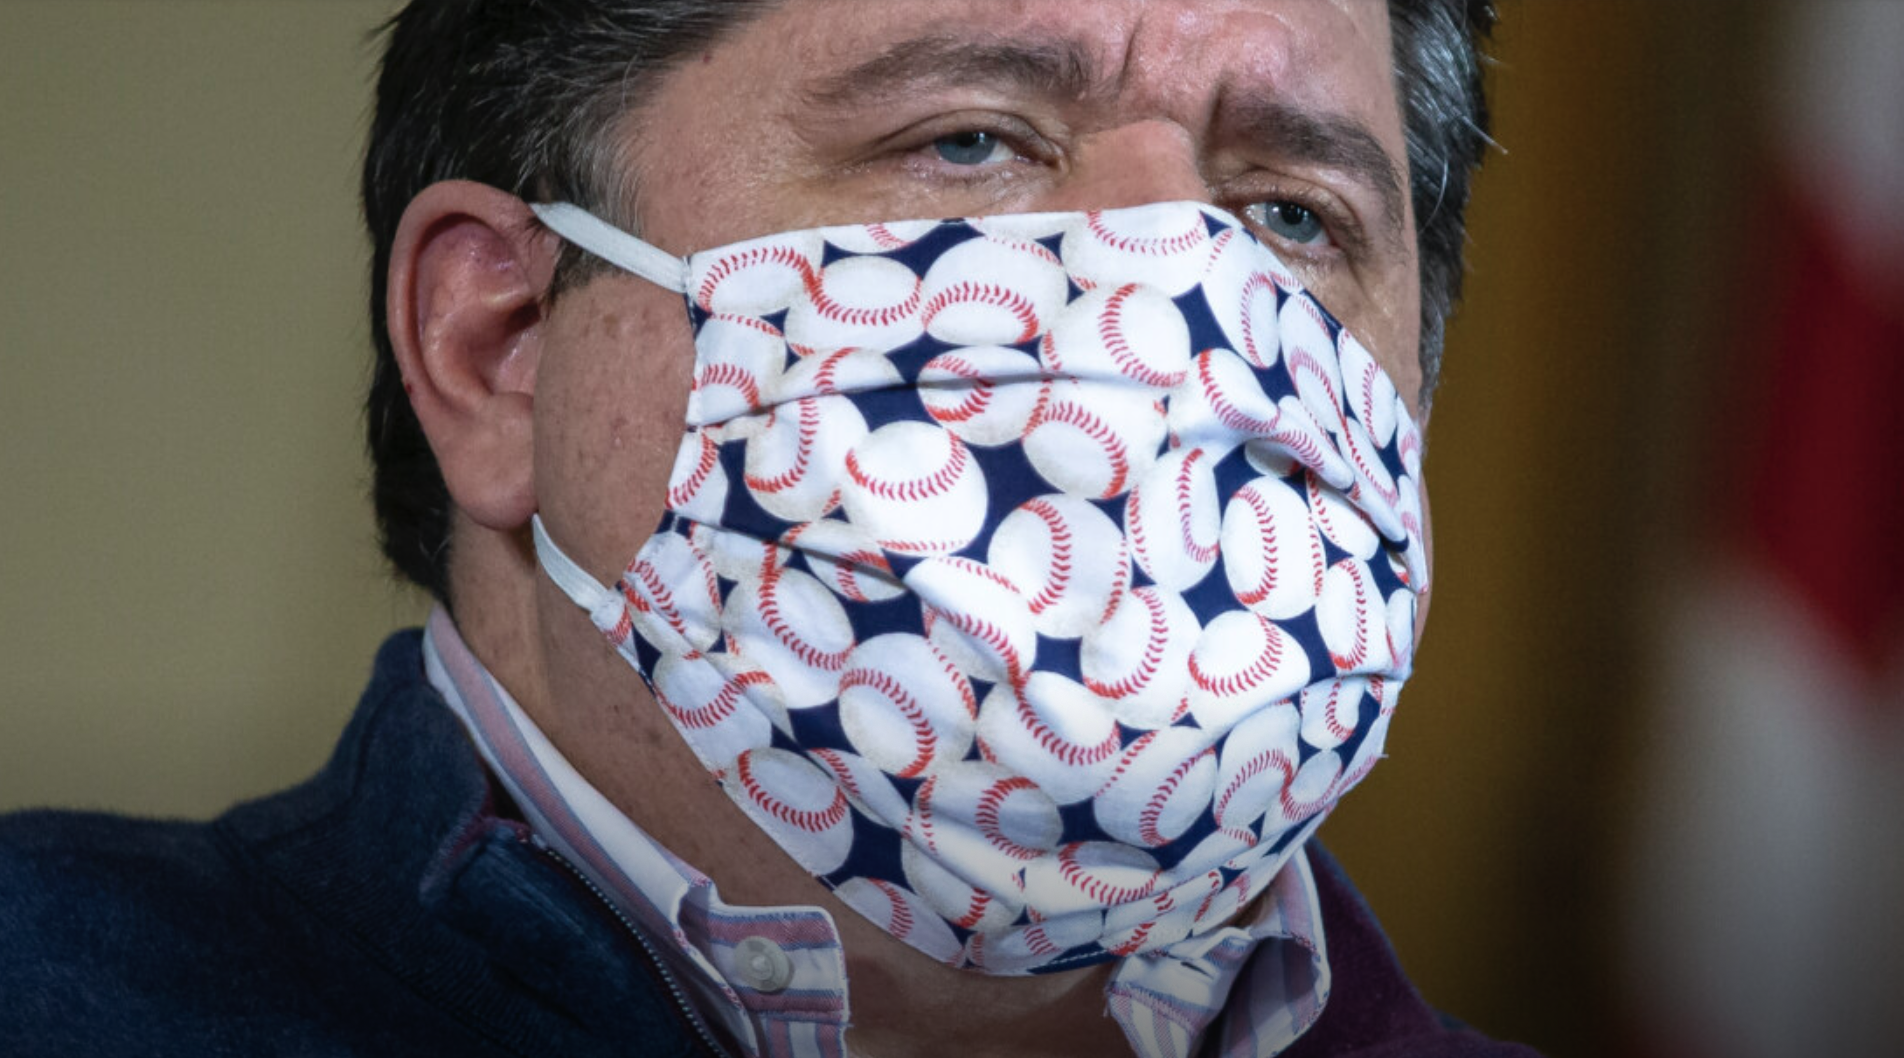 Pritzker with mask